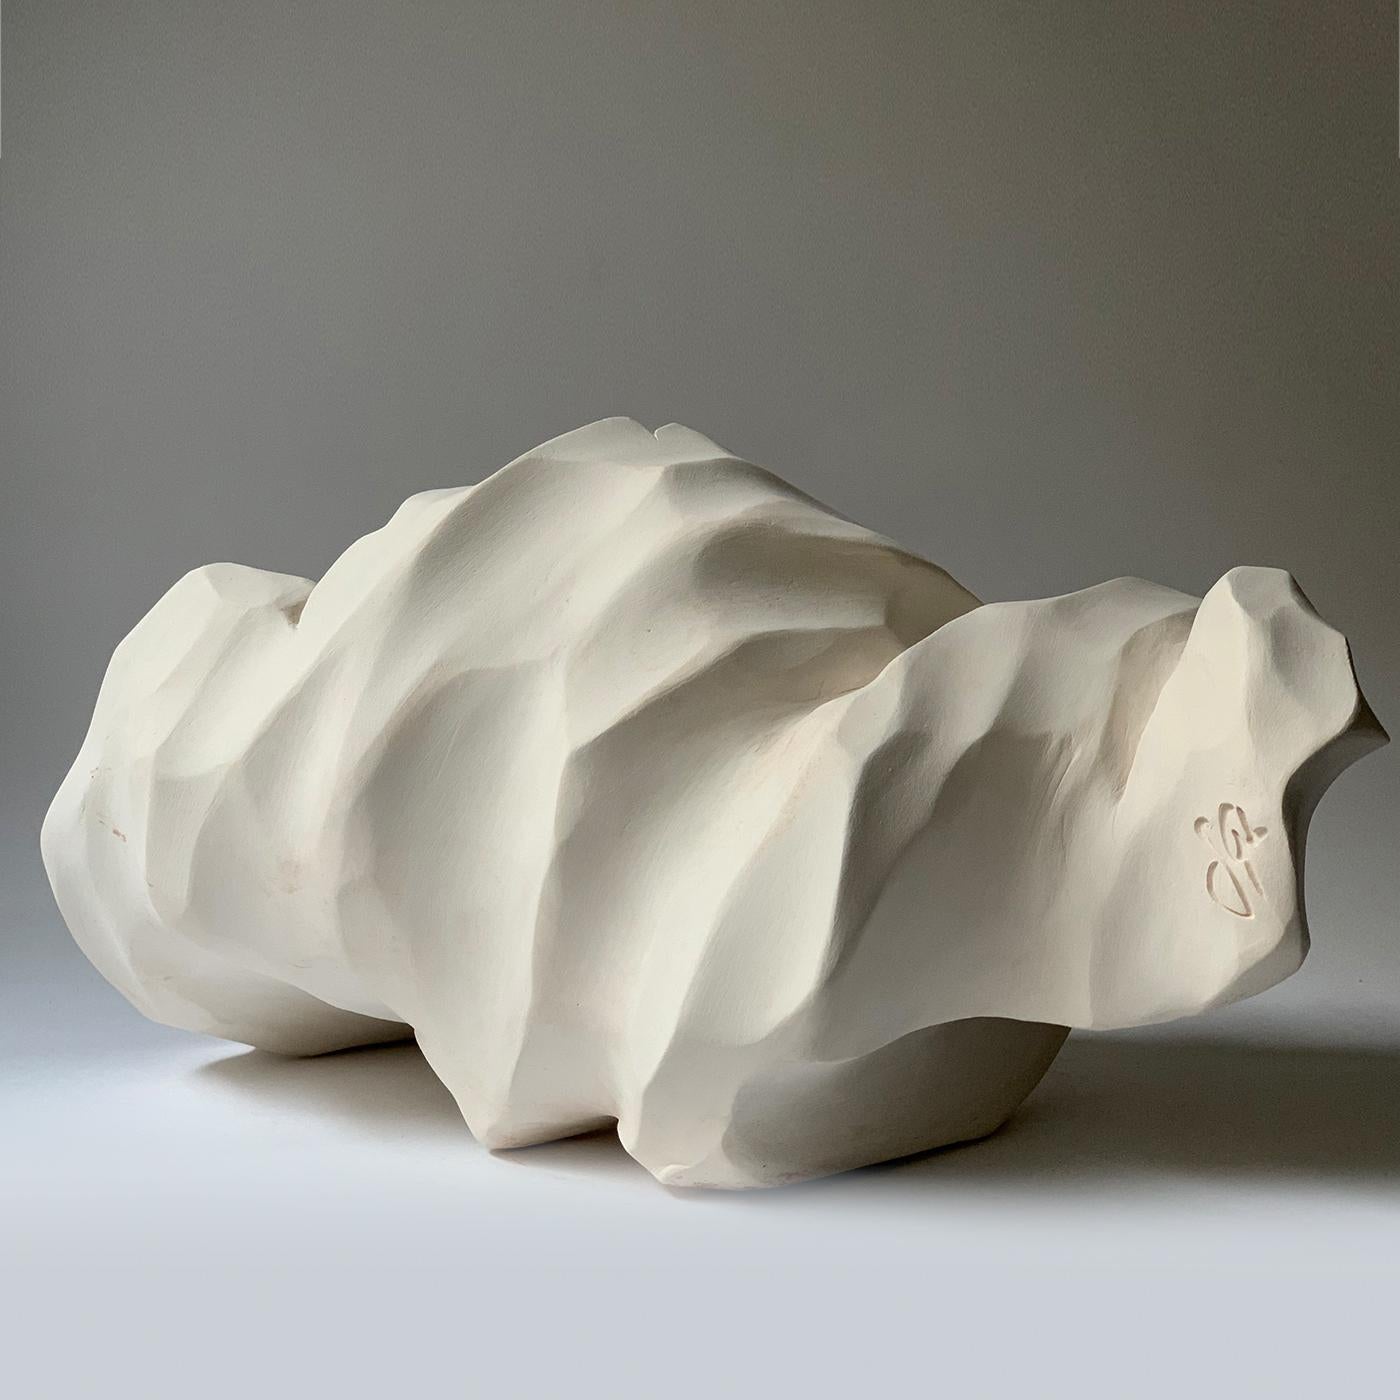 A large, central cavity defines the intriguing yet unsettling character of this spectacular sculpture, exuding fluid and dynamic qualities of elegant sophistication. Handcrafted of ceramic, it belongs to a series whose protagonist is emptiness. It